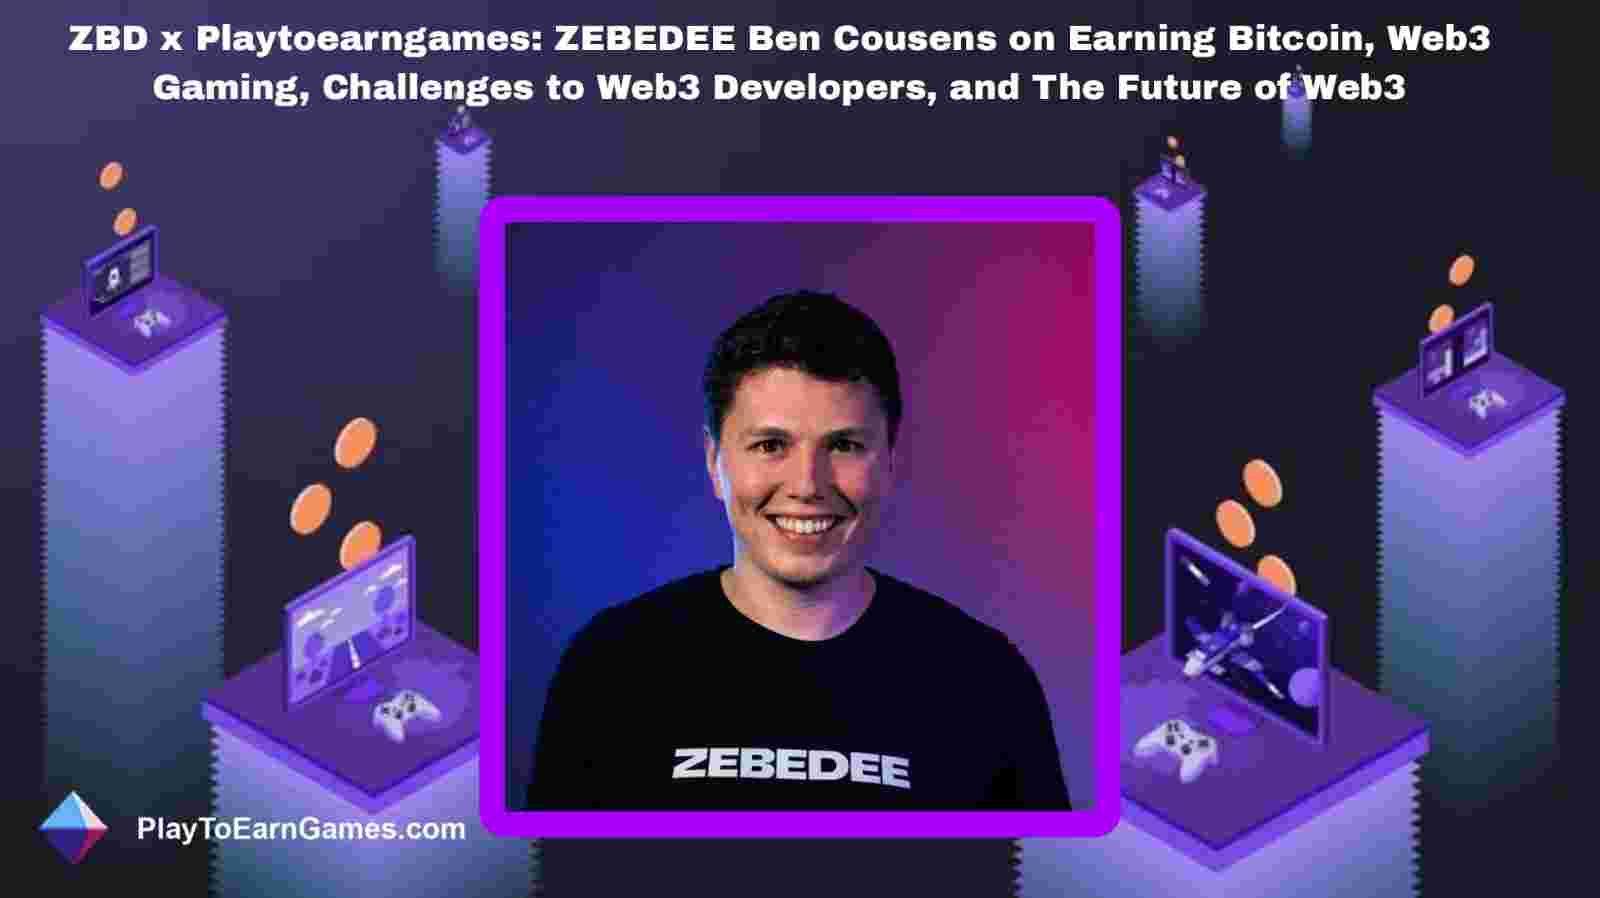 ZBD's Bitcoin Rewards, Trends, and Interview with Ben Cousens